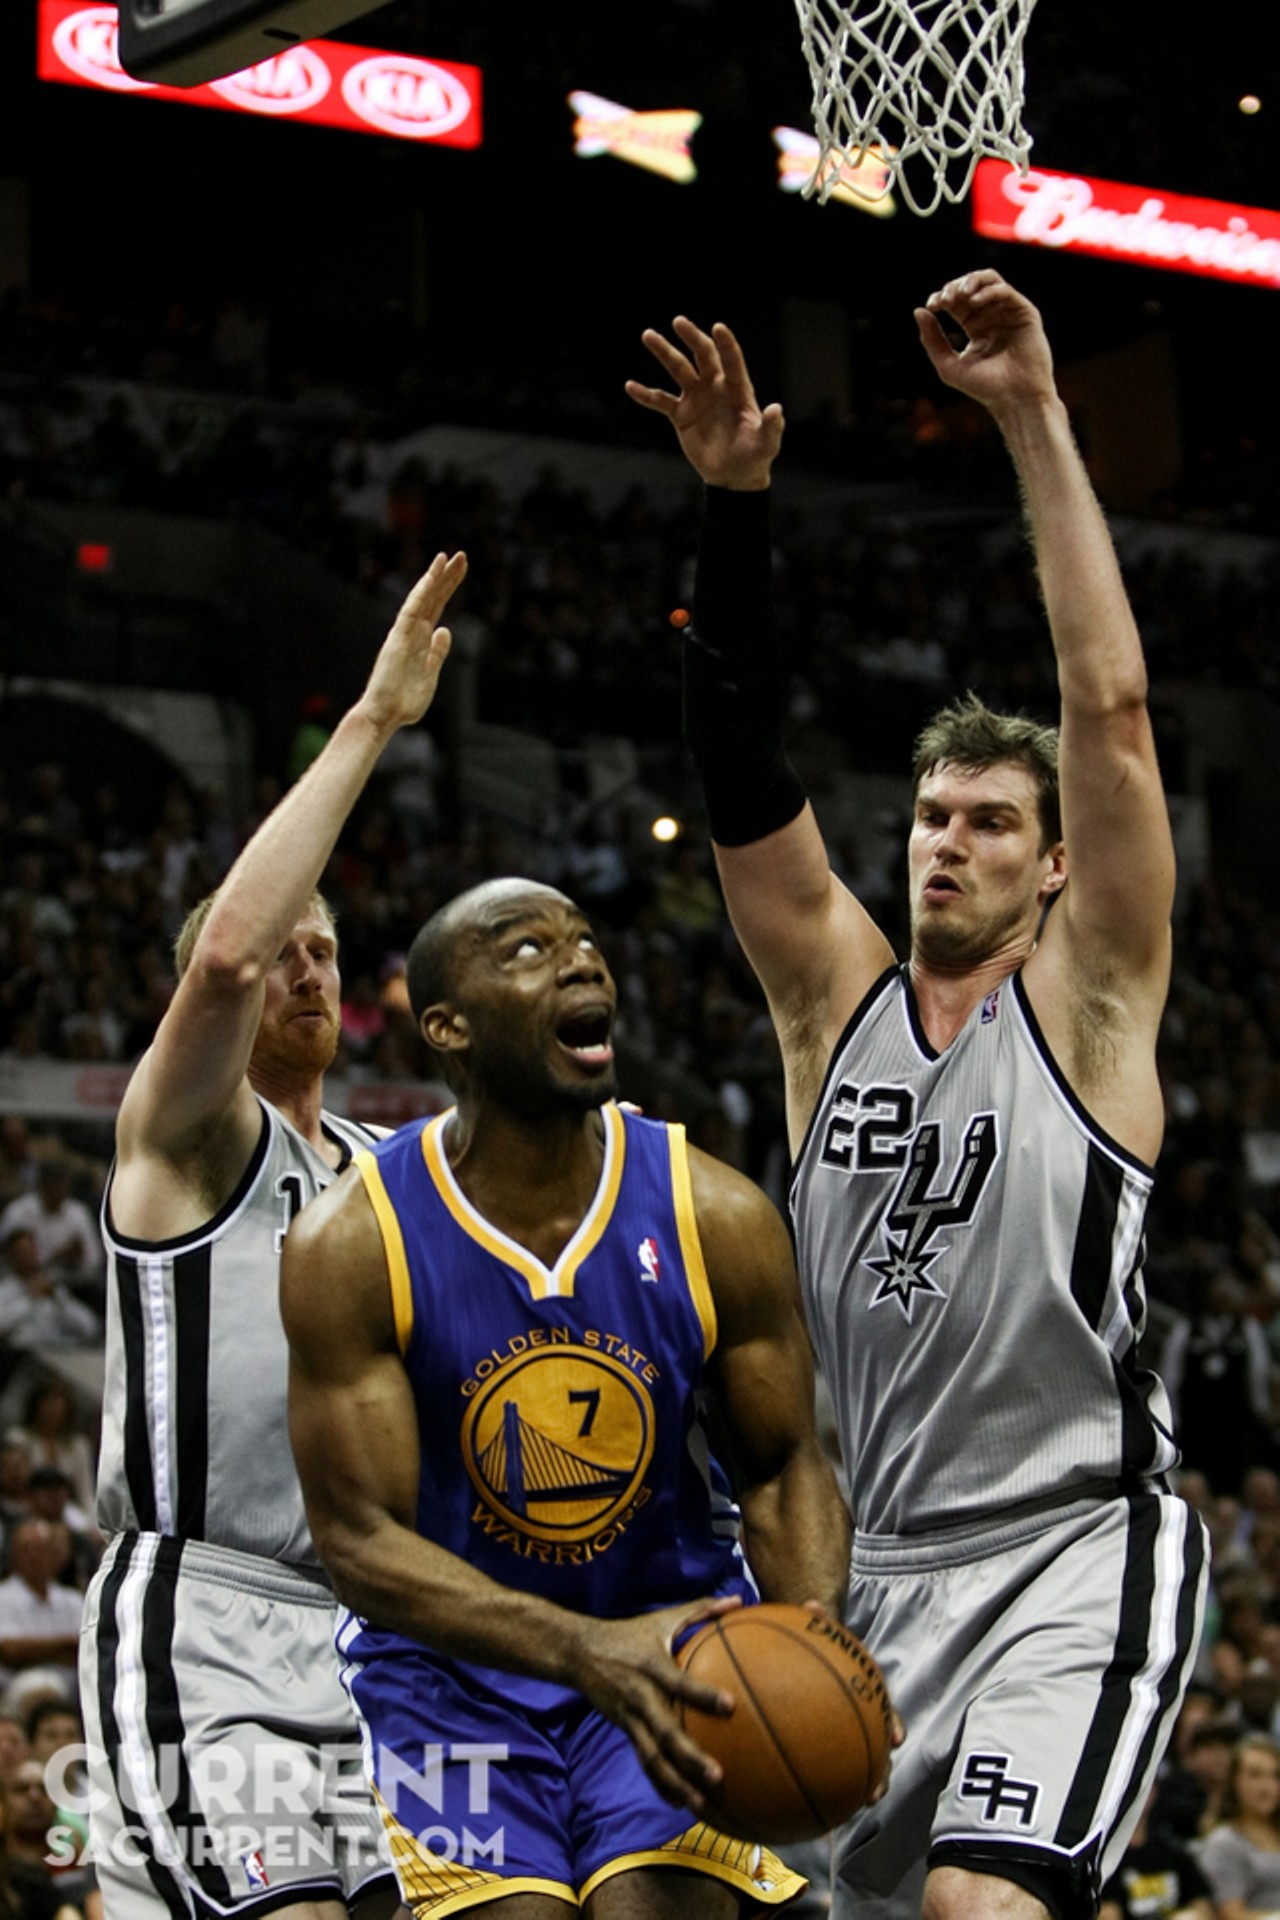 Golden State's Carl Landry gets caught under the basket by San Antonio's Matt Bonner(left) and Tiago Splitter (right) during the 1st half of Game 5 of the Western Conference Semi-Final Playoff series on Tuesday May 14th, 2013 in San Antonio, Texas (Josh Huskin / www.joshhuskin.com)